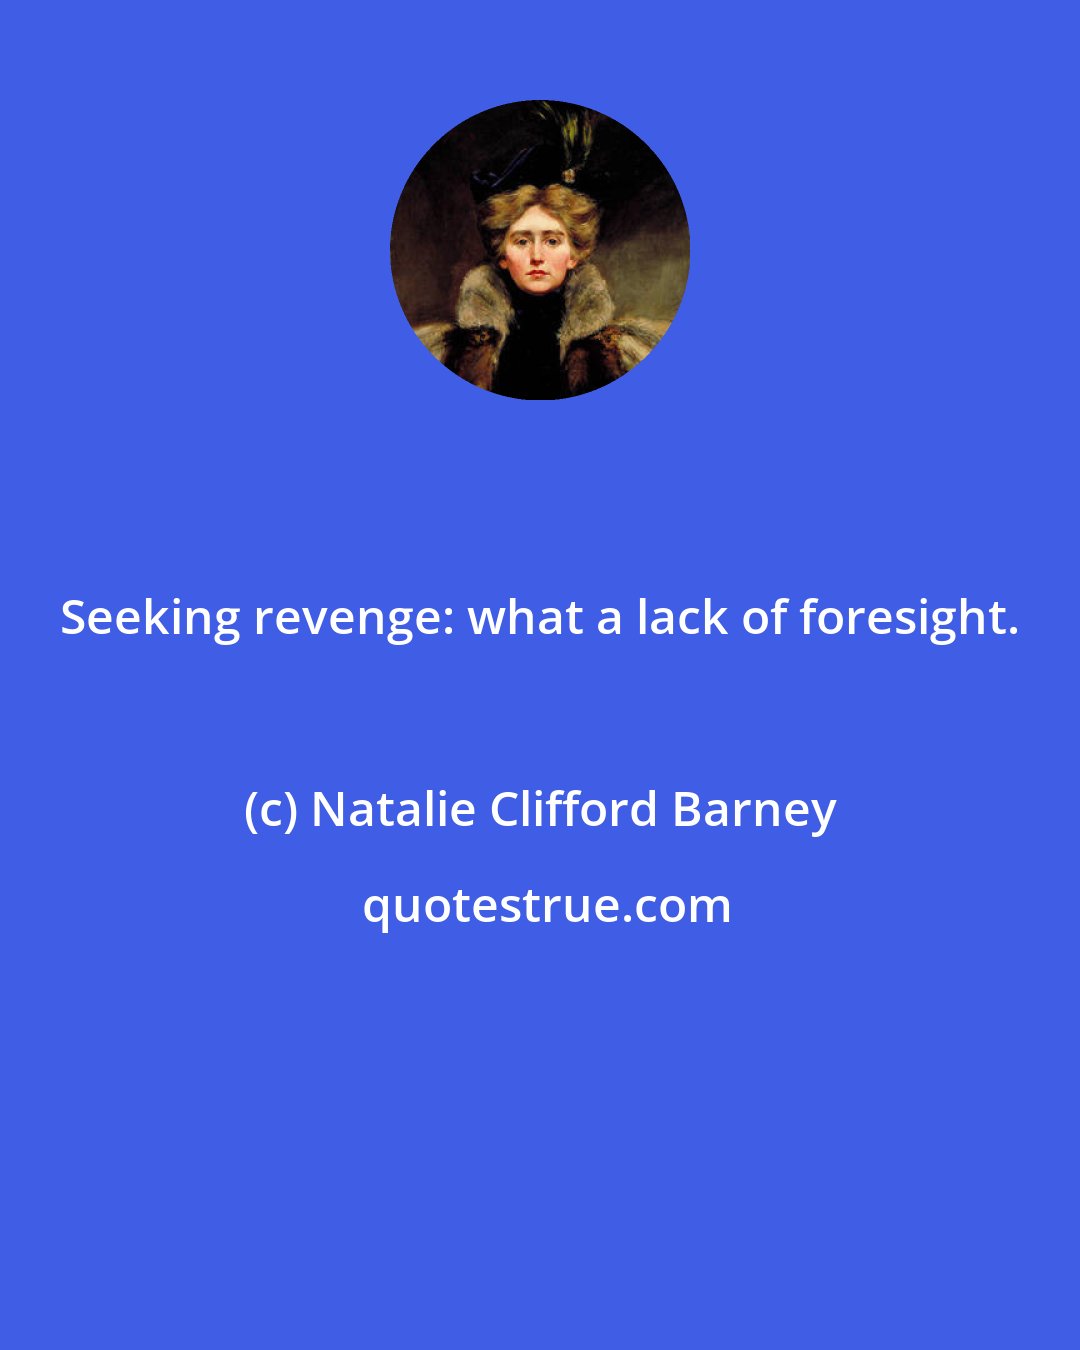 Natalie Clifford Barney: Seeking revenge: what a lack of foresight.